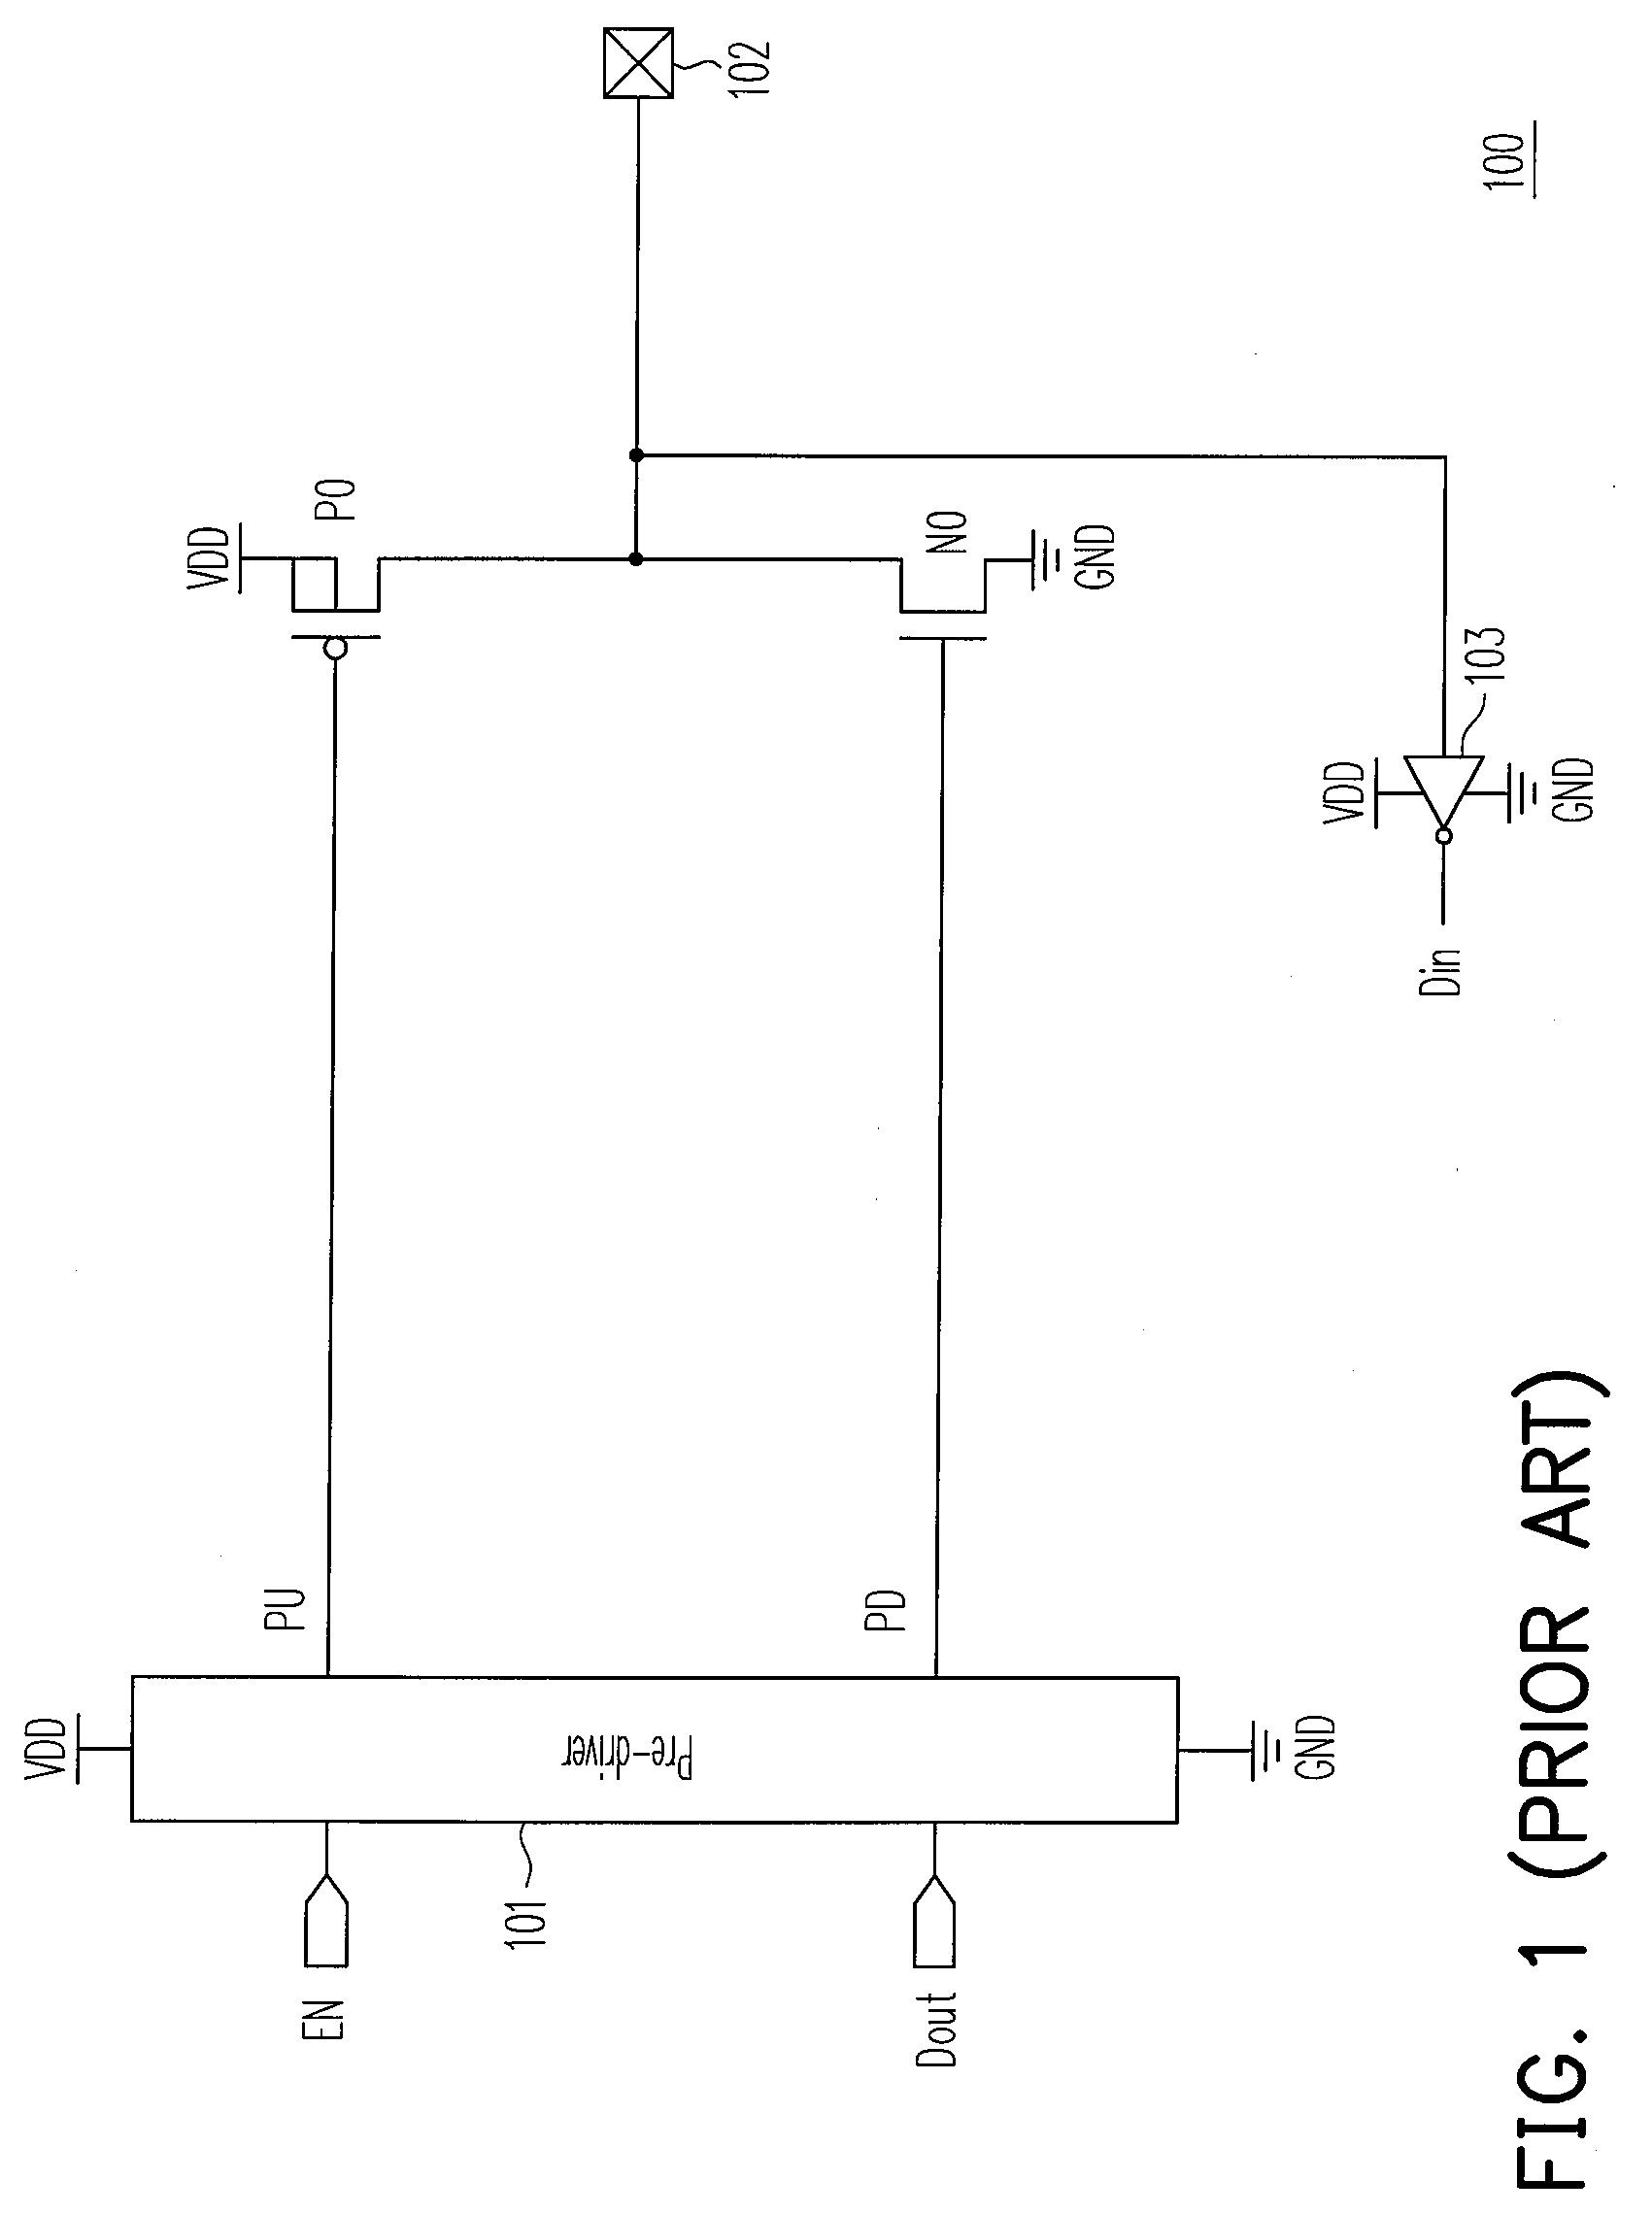 Mixed-voltage I/O buffer to limit hot-carrier degradation